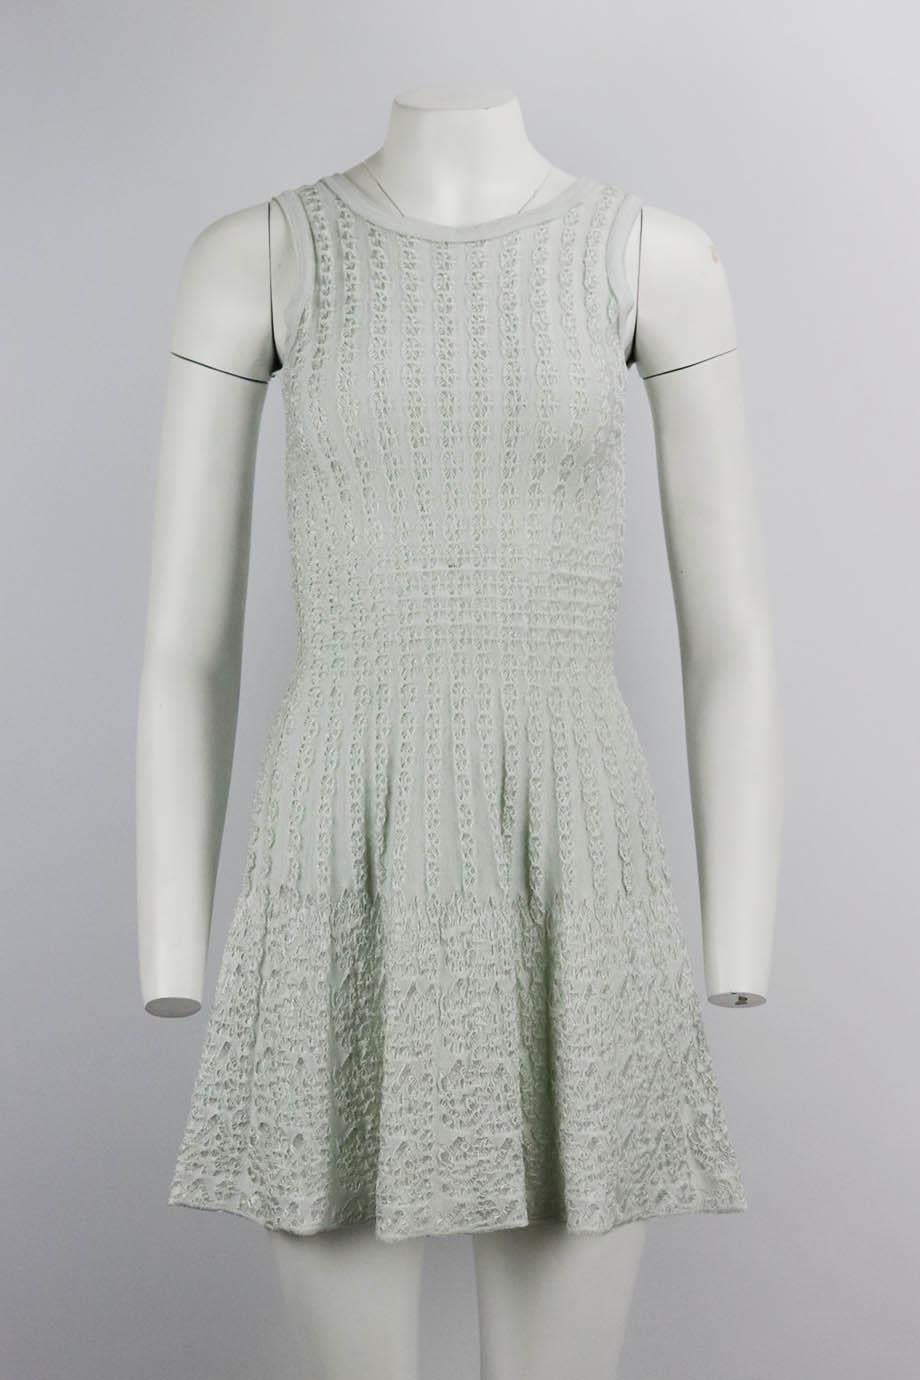 Azzedine Alaïa jacquard knit mini dress and cardigan set. Light-blue. Sleeveless, crewneck. Zip fastening at back. 95% Viscose, 5% polyamide. Size: FR 36 (UK 8, US 4, IT 40). Bust: 26 in. Waist: 21 in. Hips: 36 in. Length: 34 in
